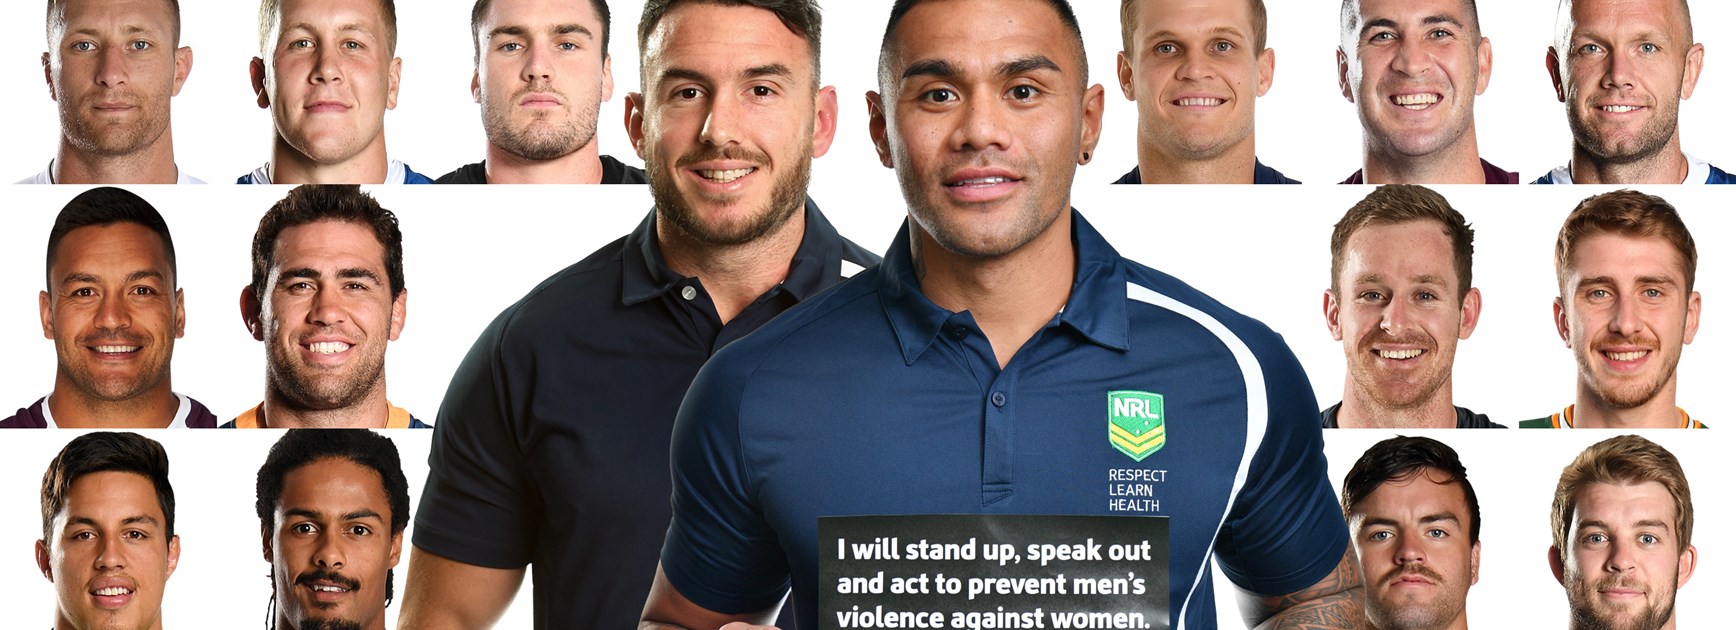 NRL stars look forward to making a difference off the field in 2019